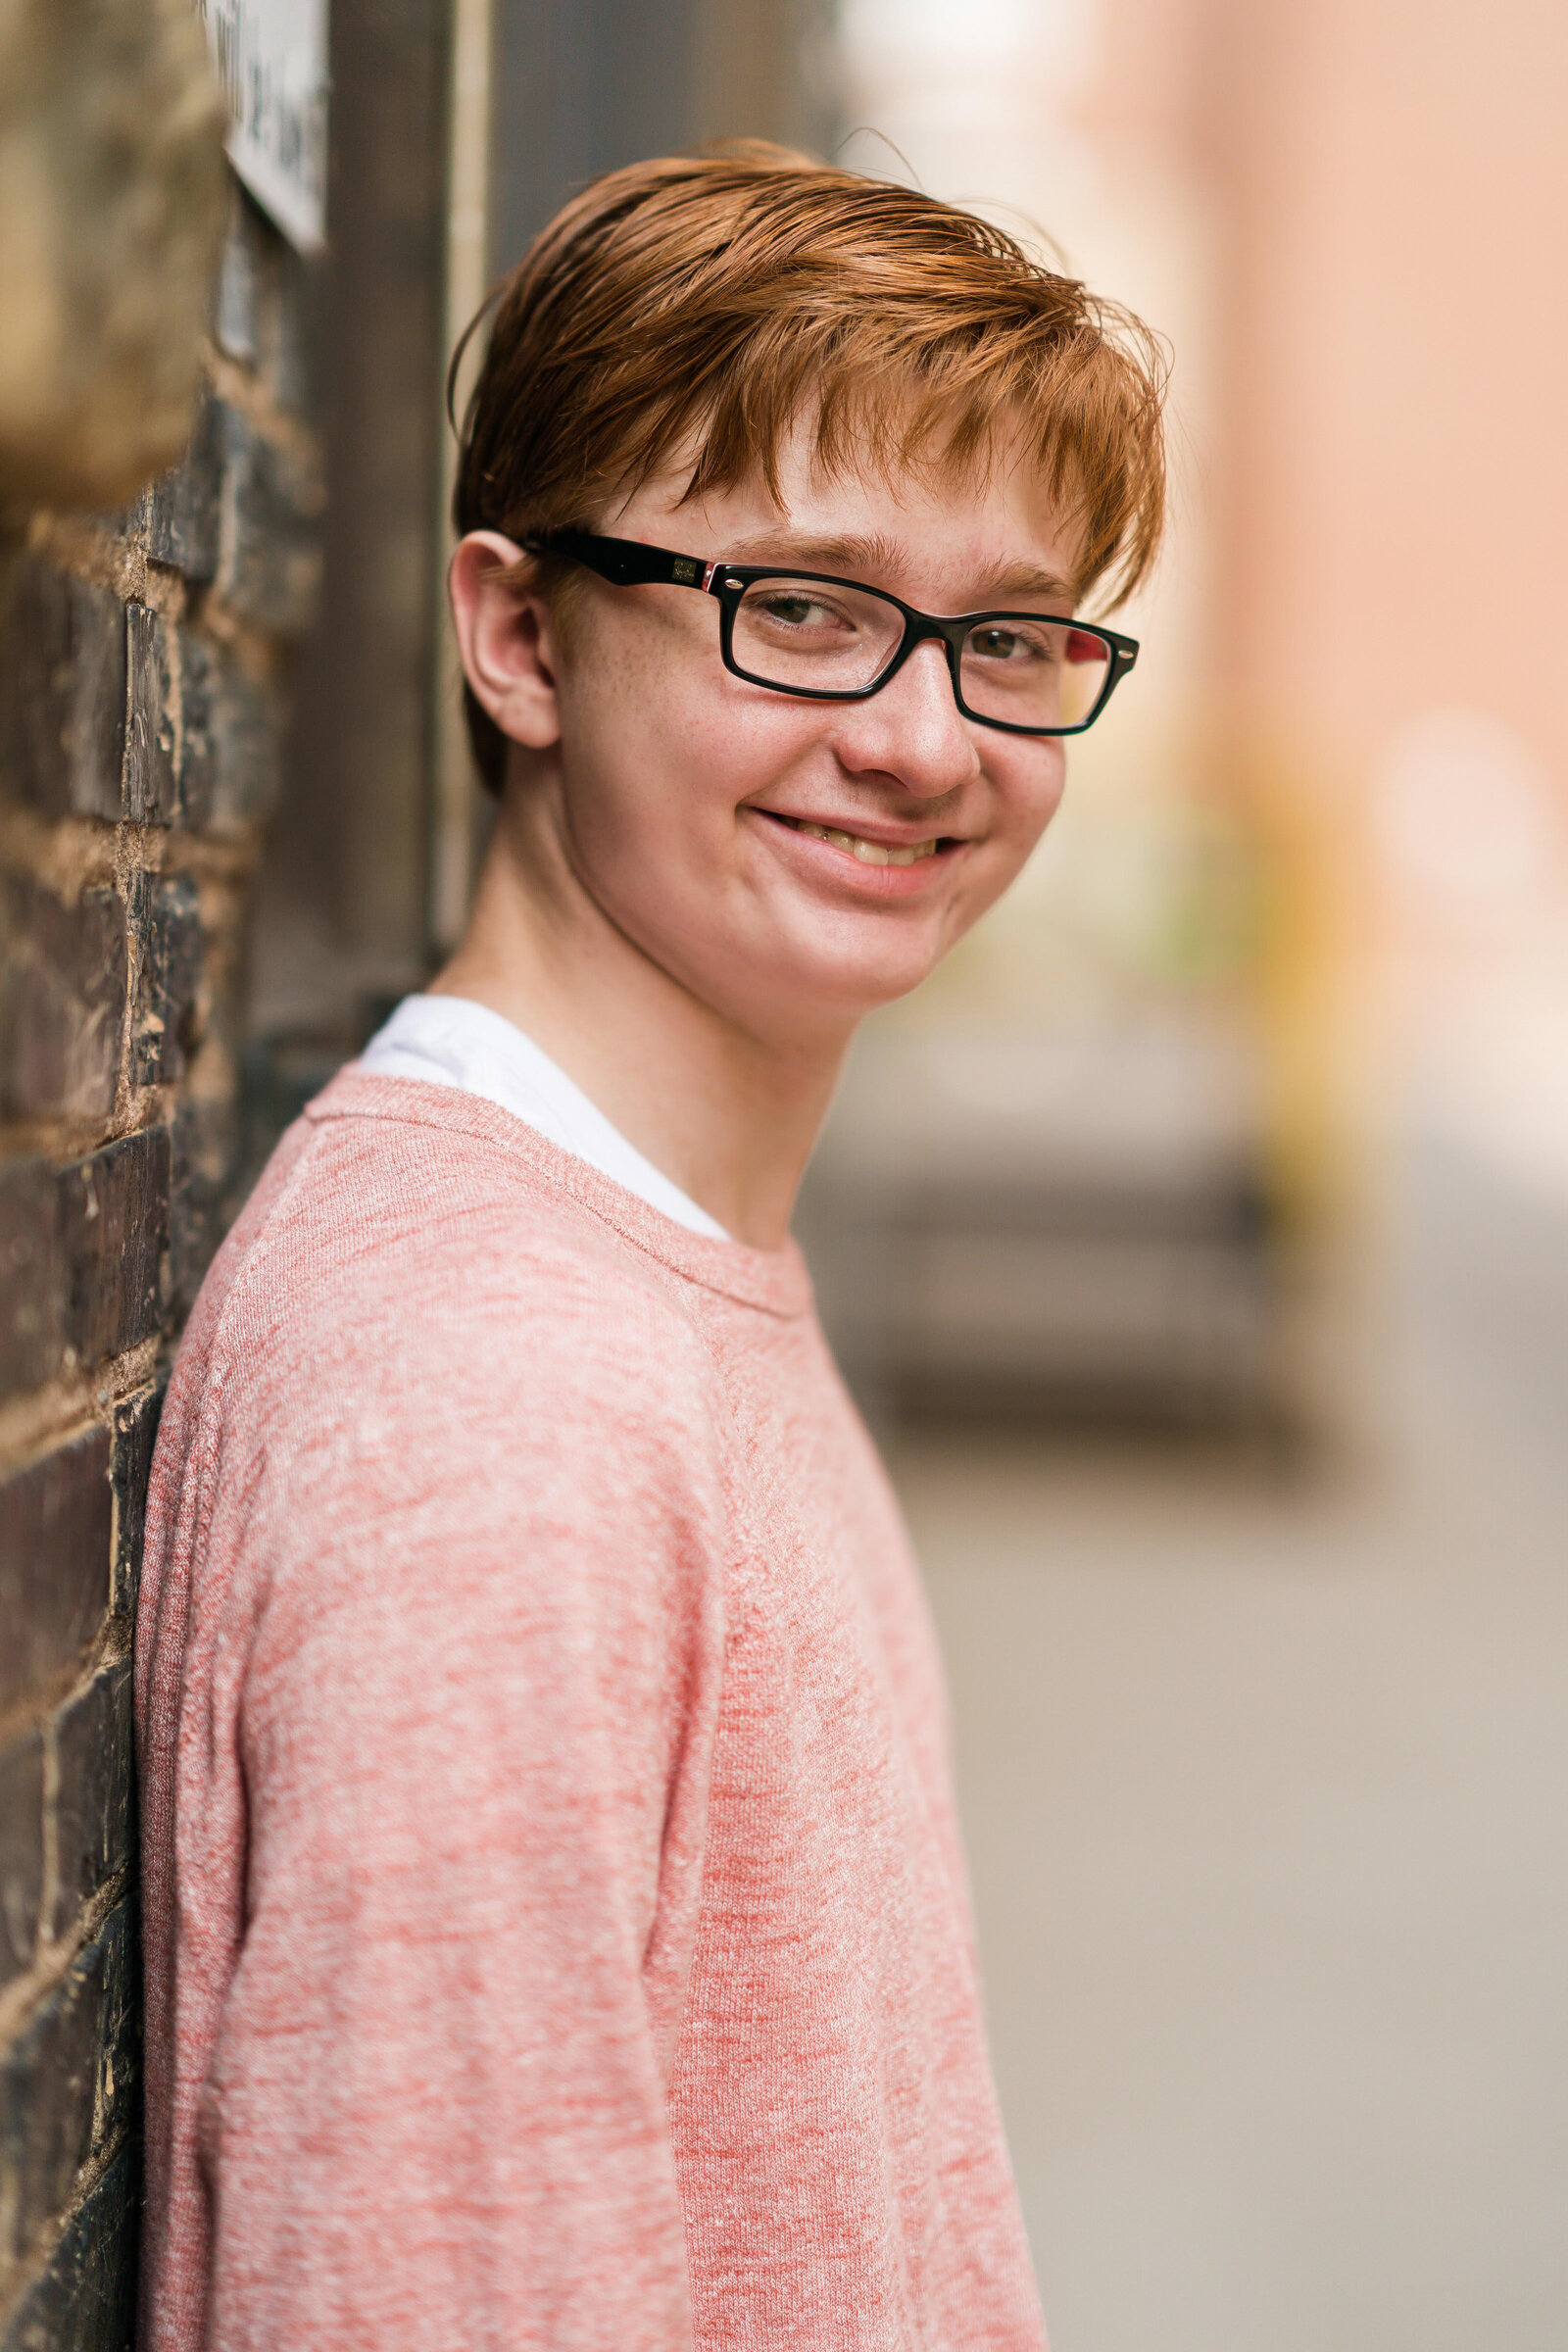 Senior boy in glasses and pink shirt leans against a brick wall.